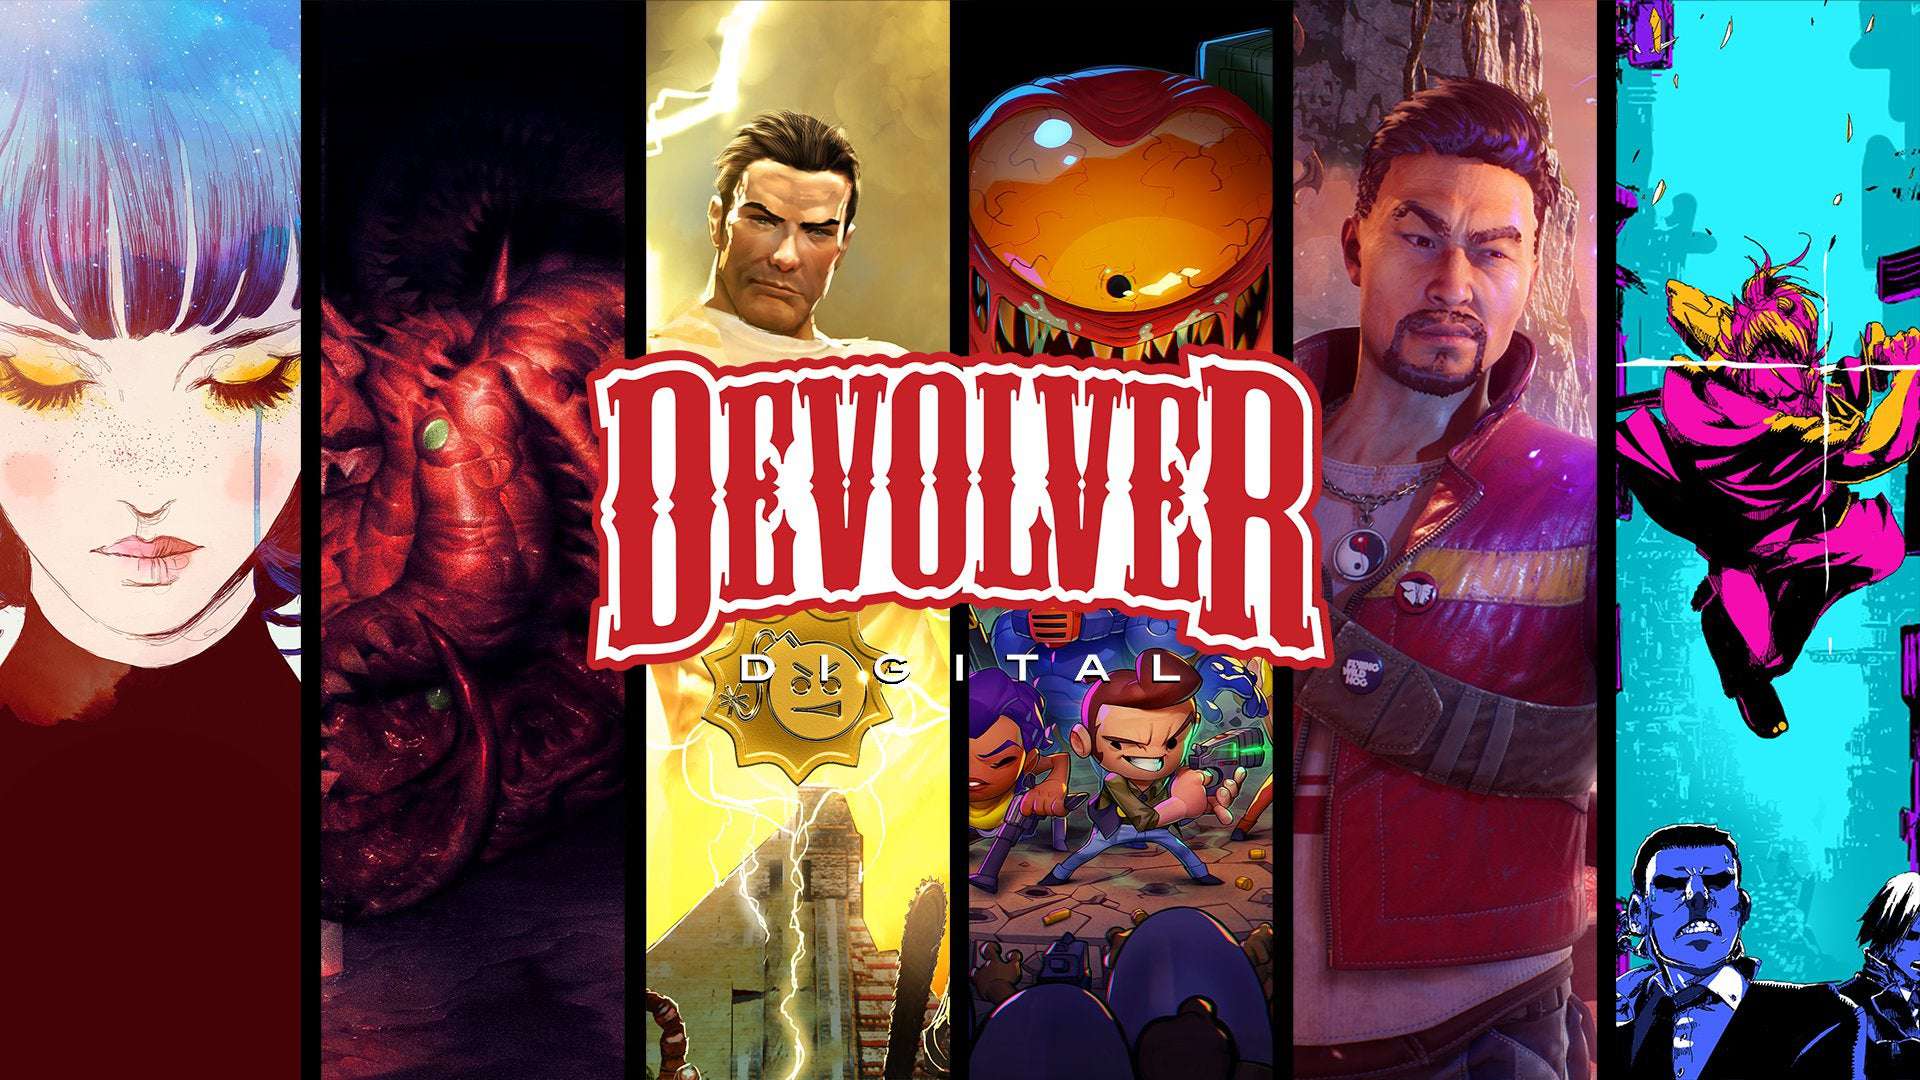 image for Devolver digital become a publicly traded company